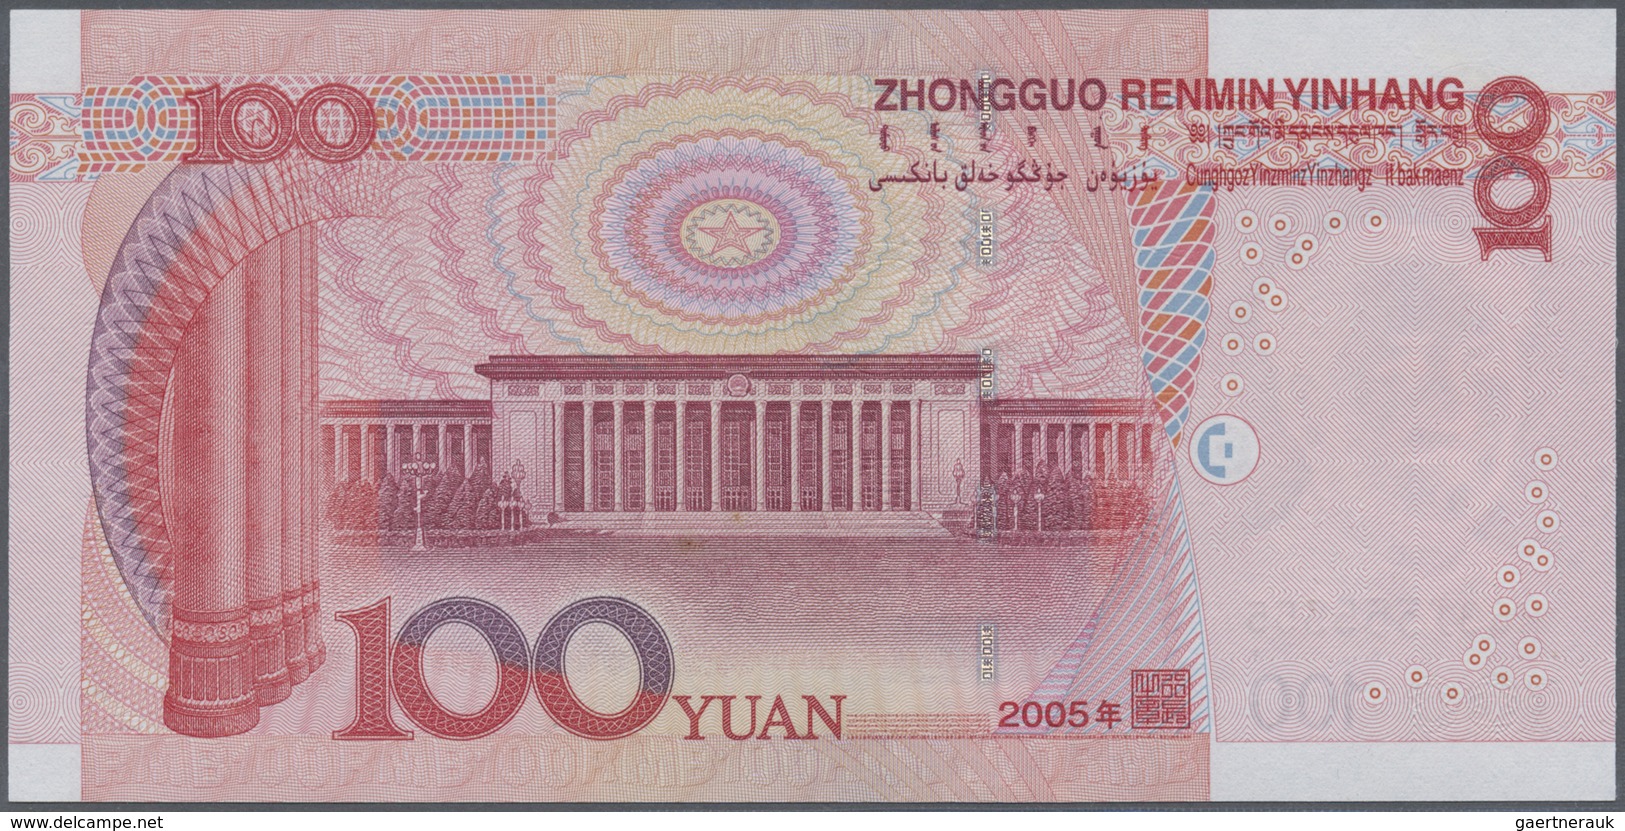 China: set of 10 notes 100 Yuan 2005 P. 907 with interesting serial numbers containing: F90Q111111,